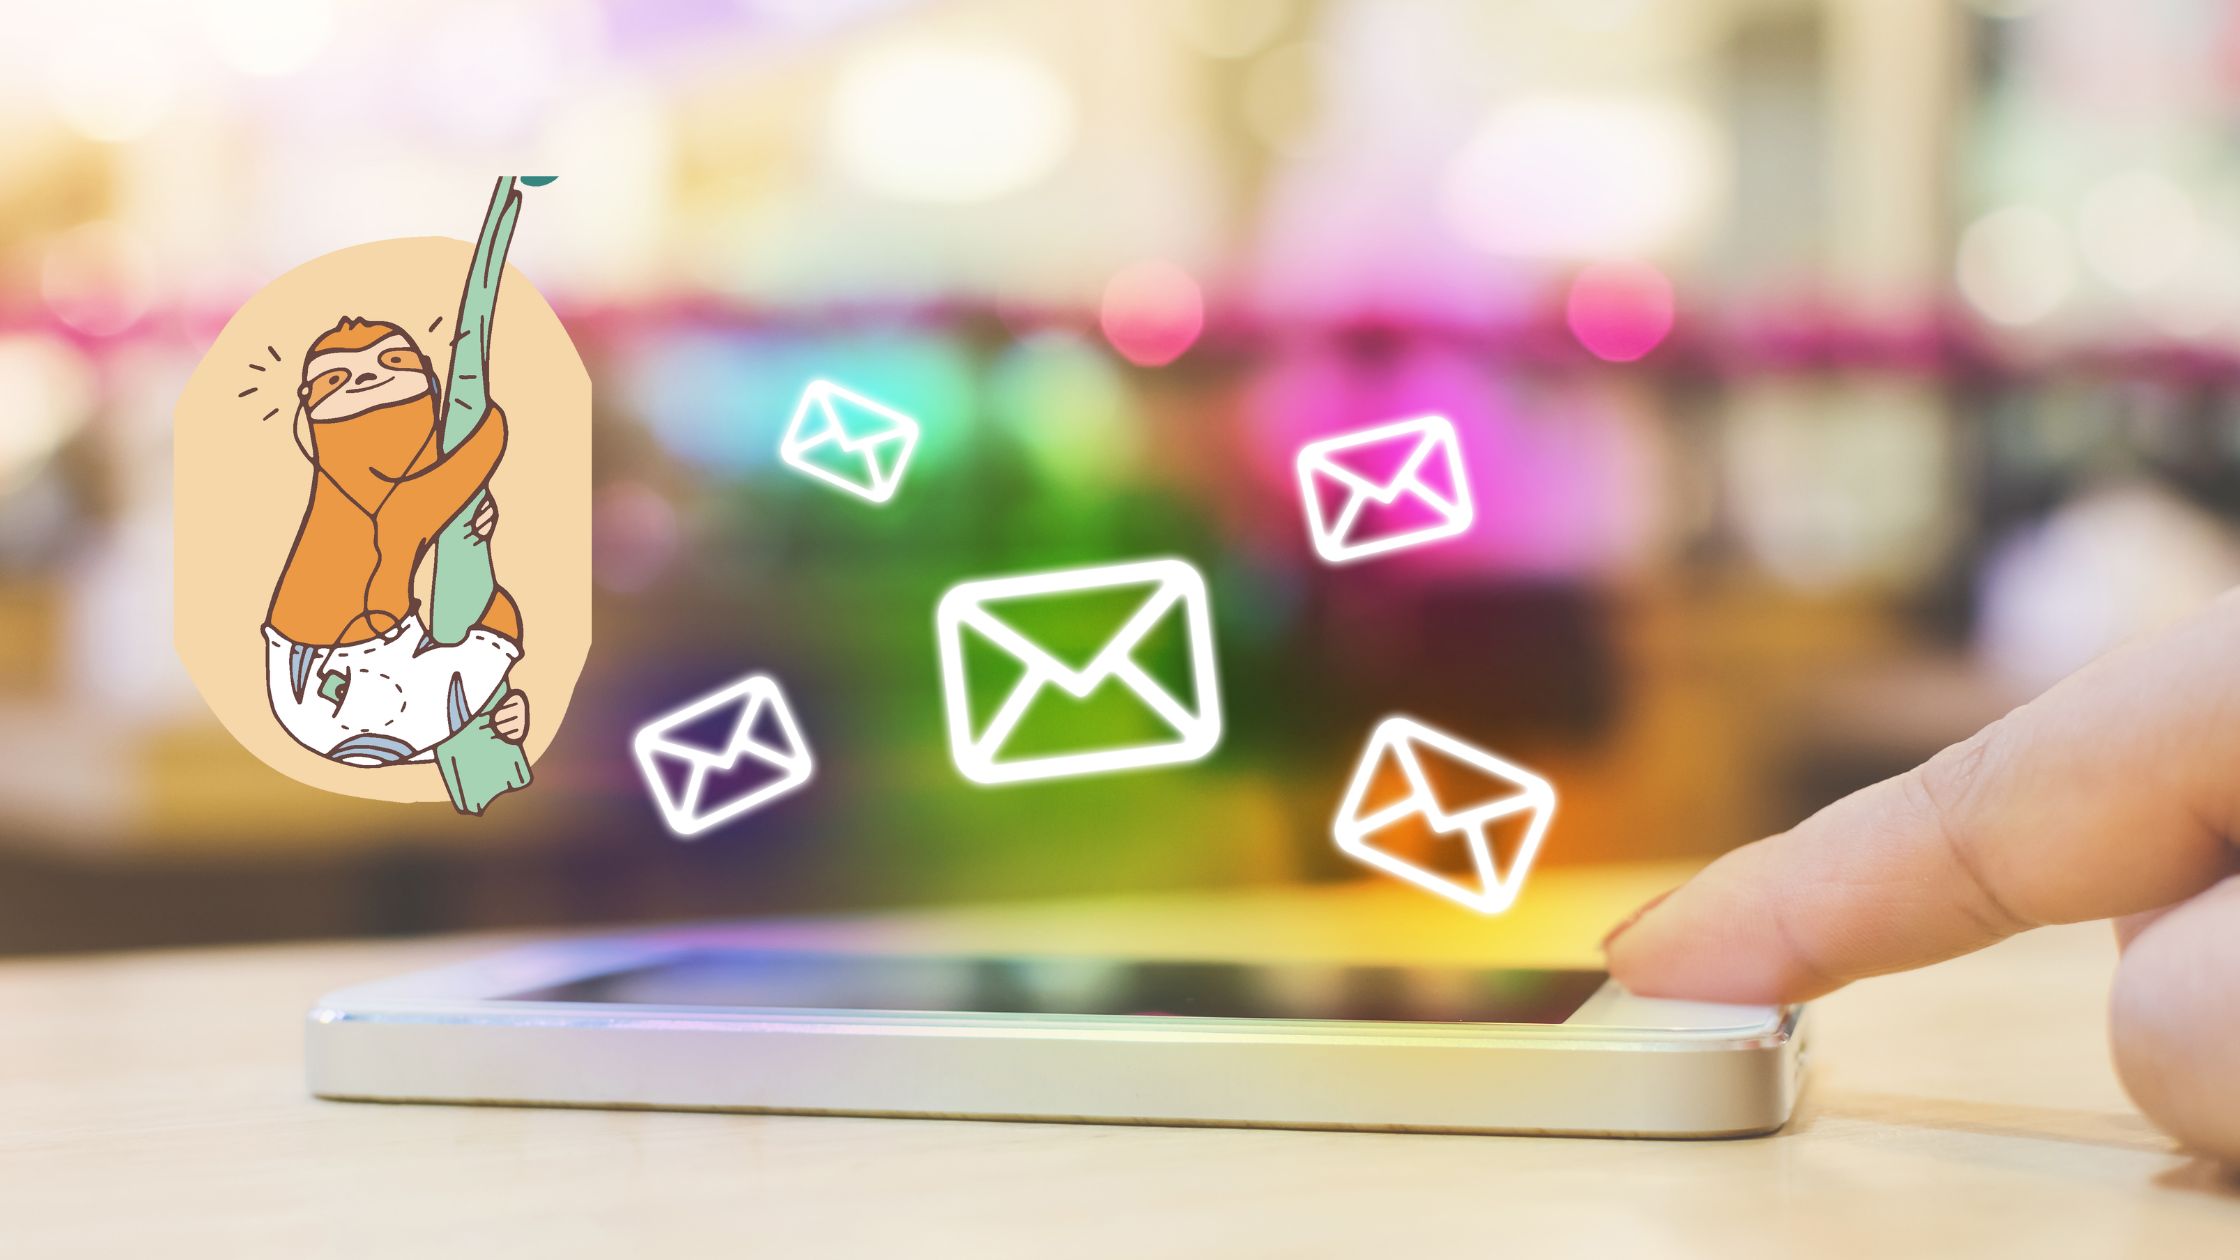 Clingy Email Marketing – What You Need to Know And How to Fix?